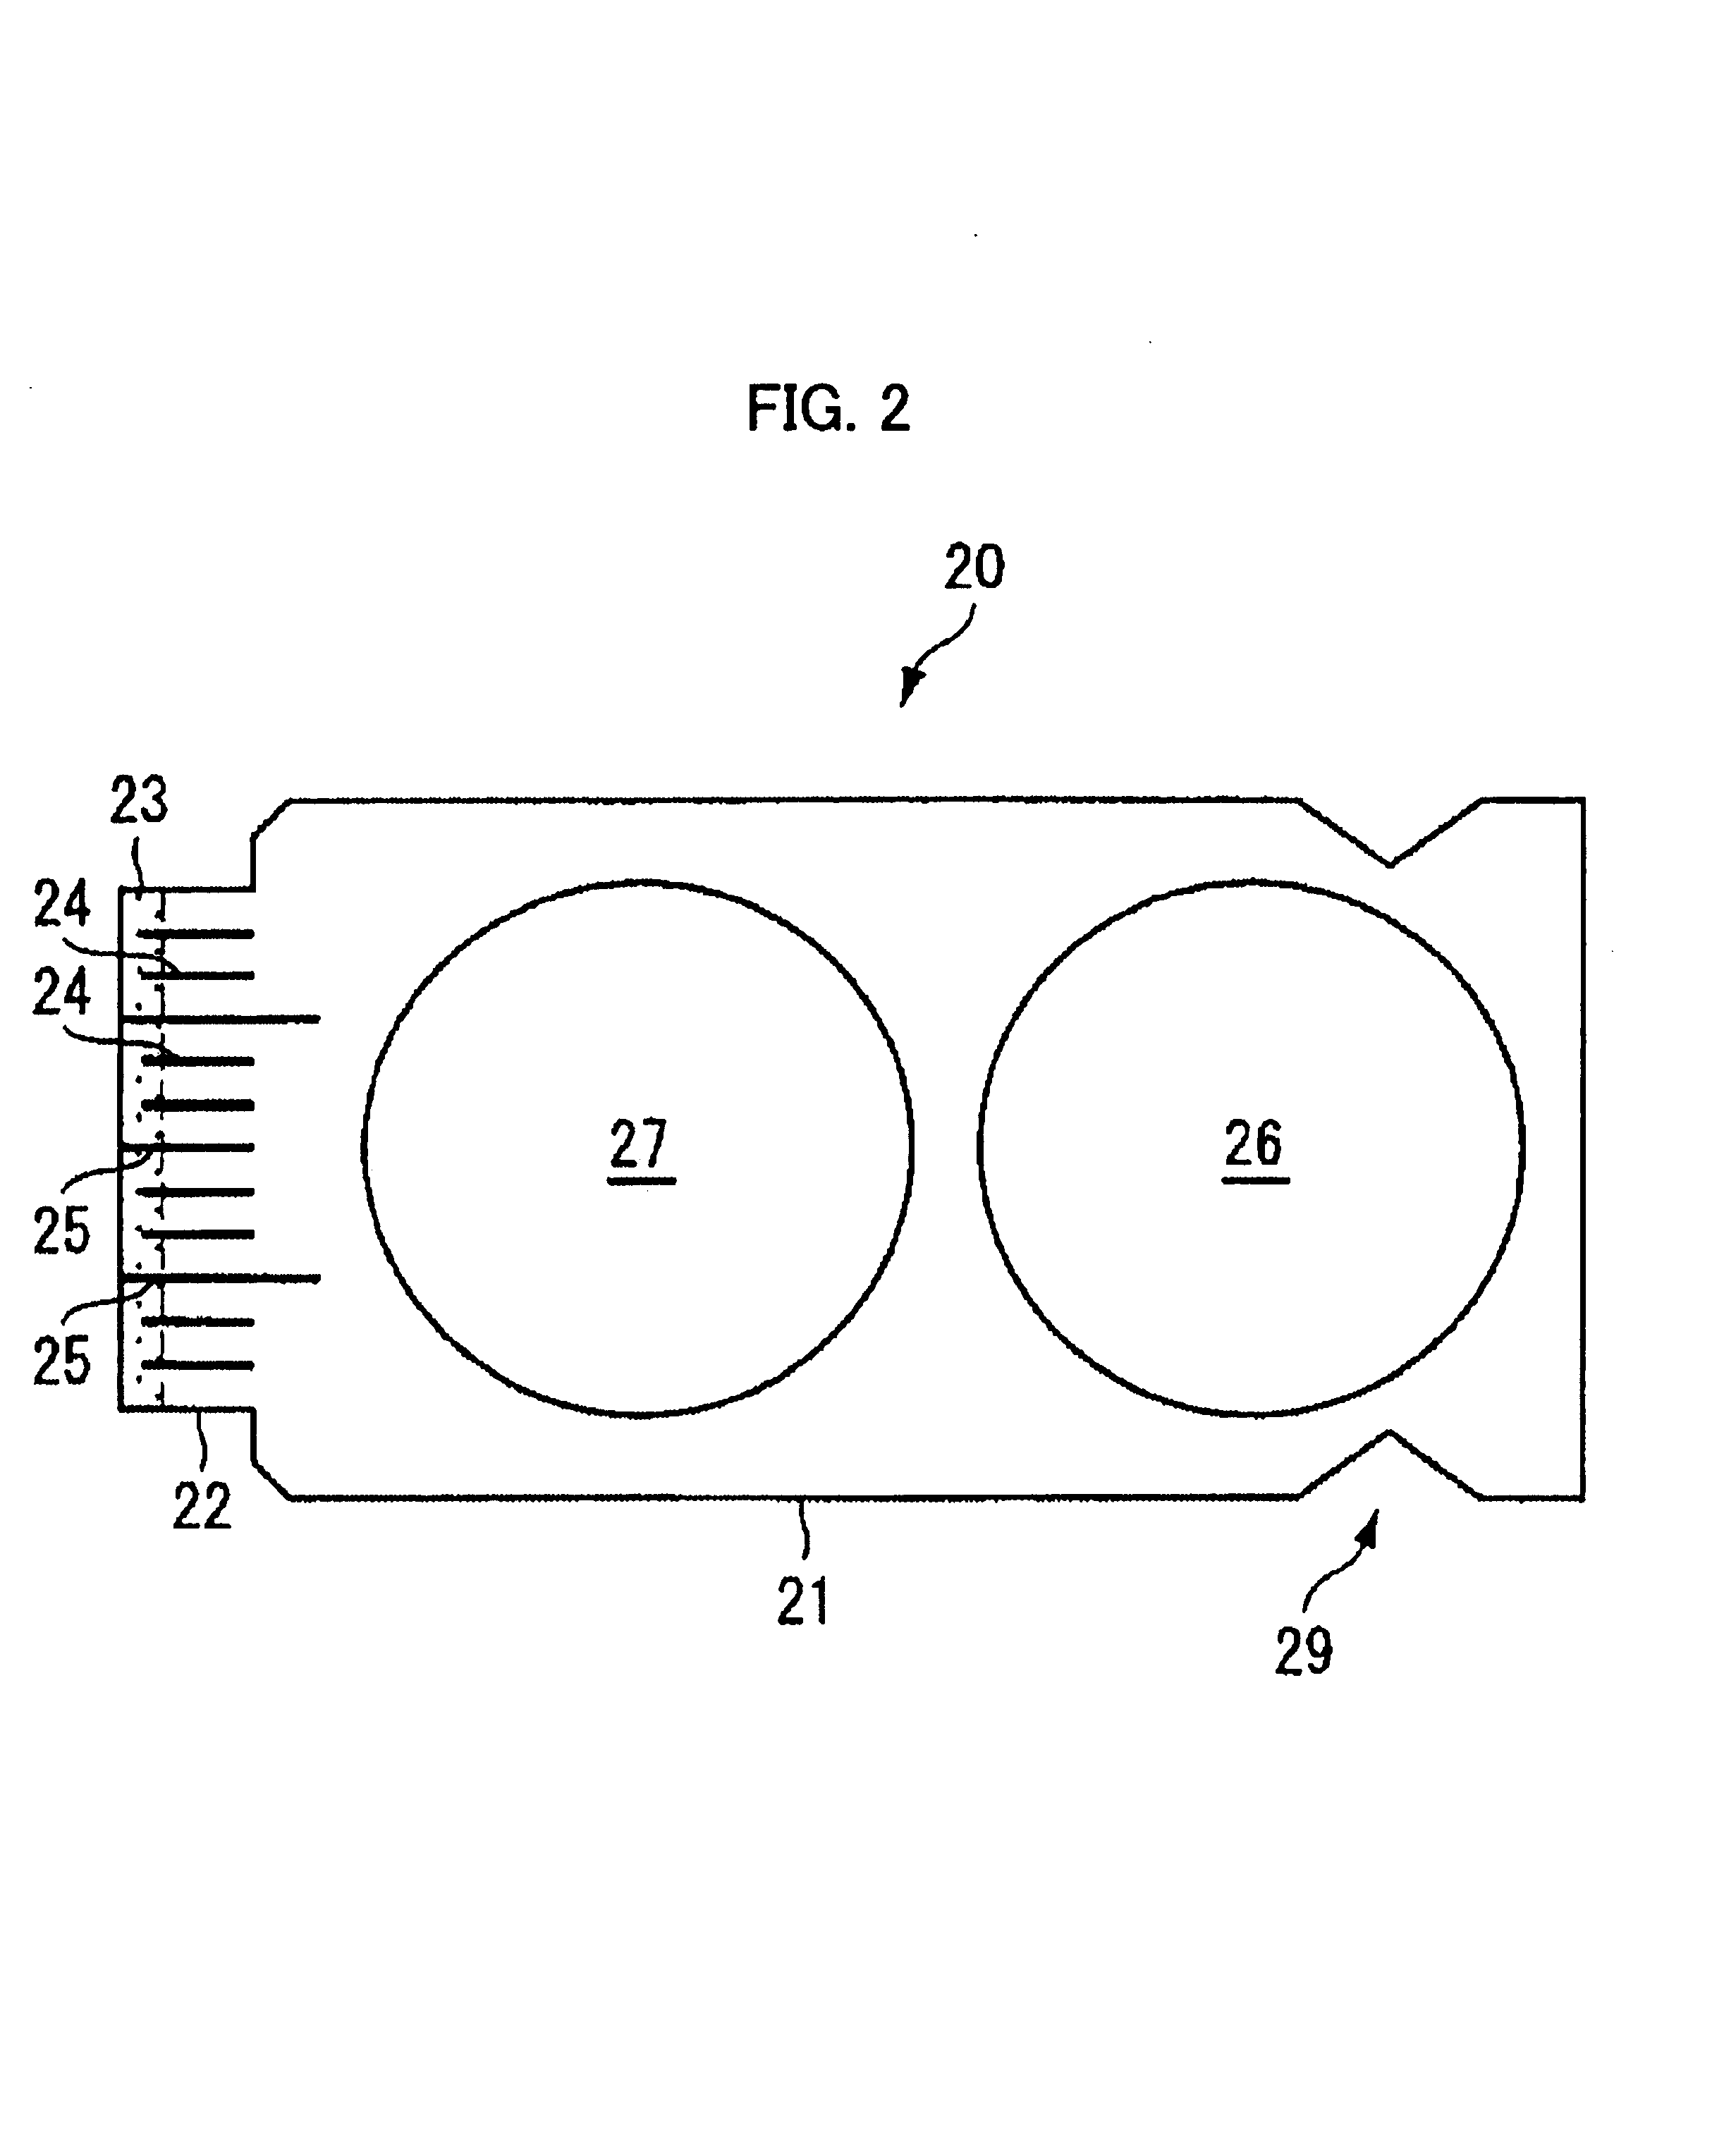 Two-dimensional laser diode array light-emitting device